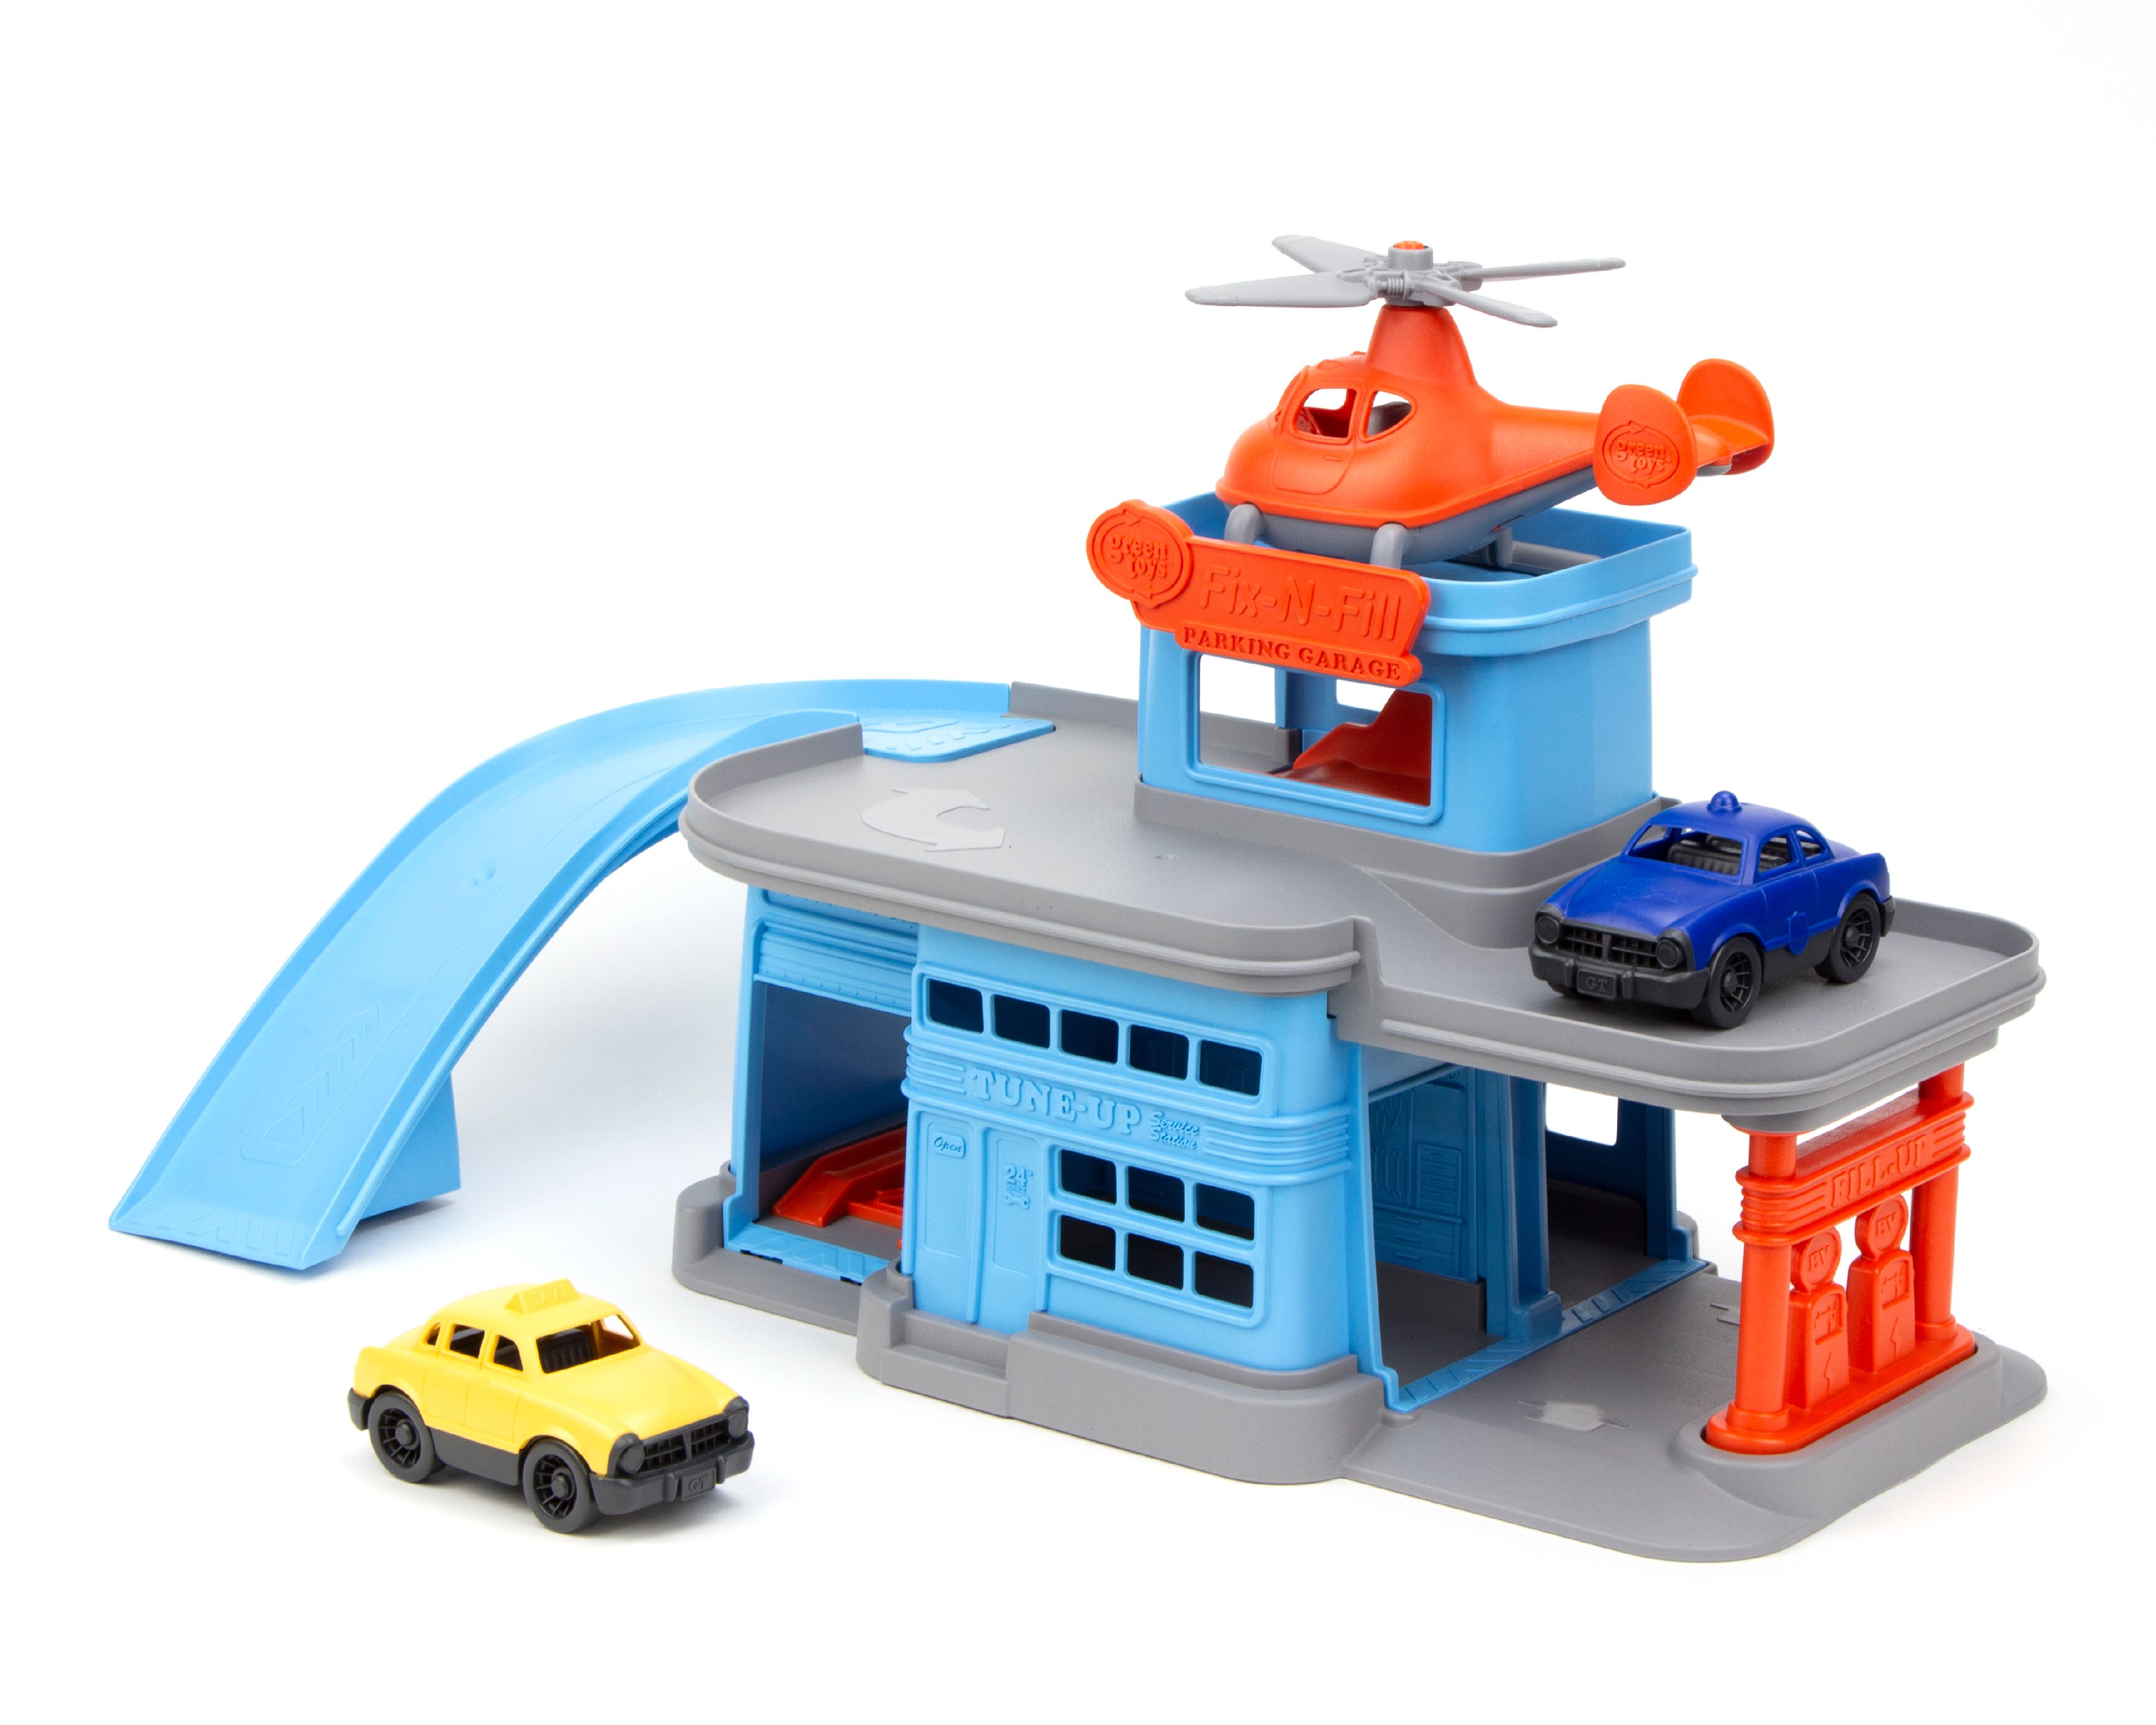 Green Toys Parking Garage, Unisex Vehicle Playset for Children Ages 3 and up - image 1 of 8